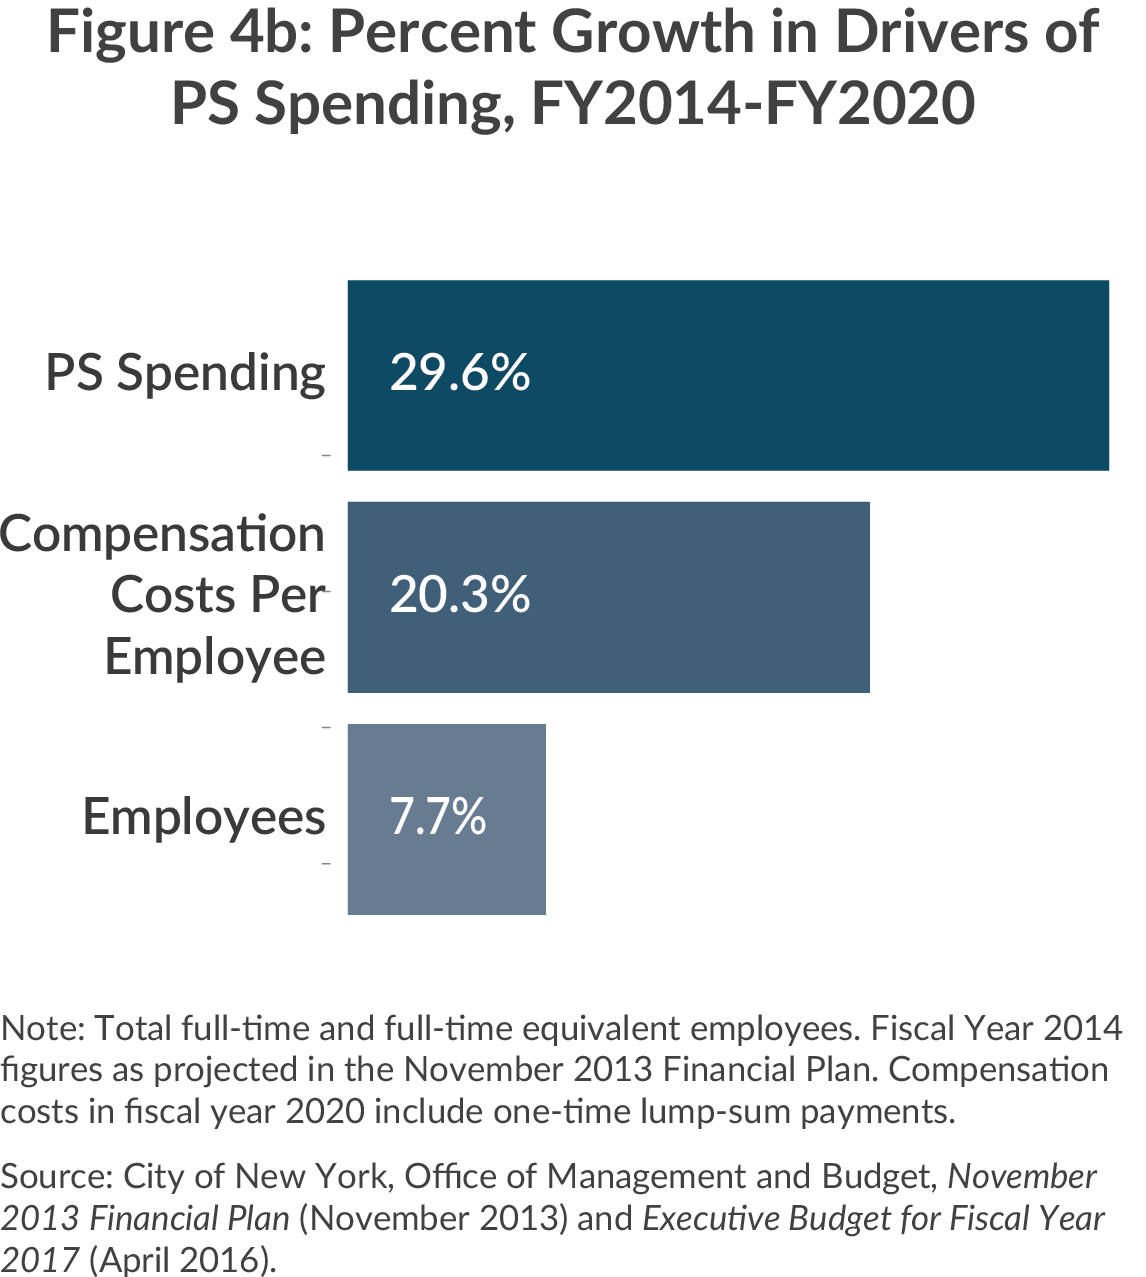 Percent growth in drivers of PS spending, Fy2014-2020